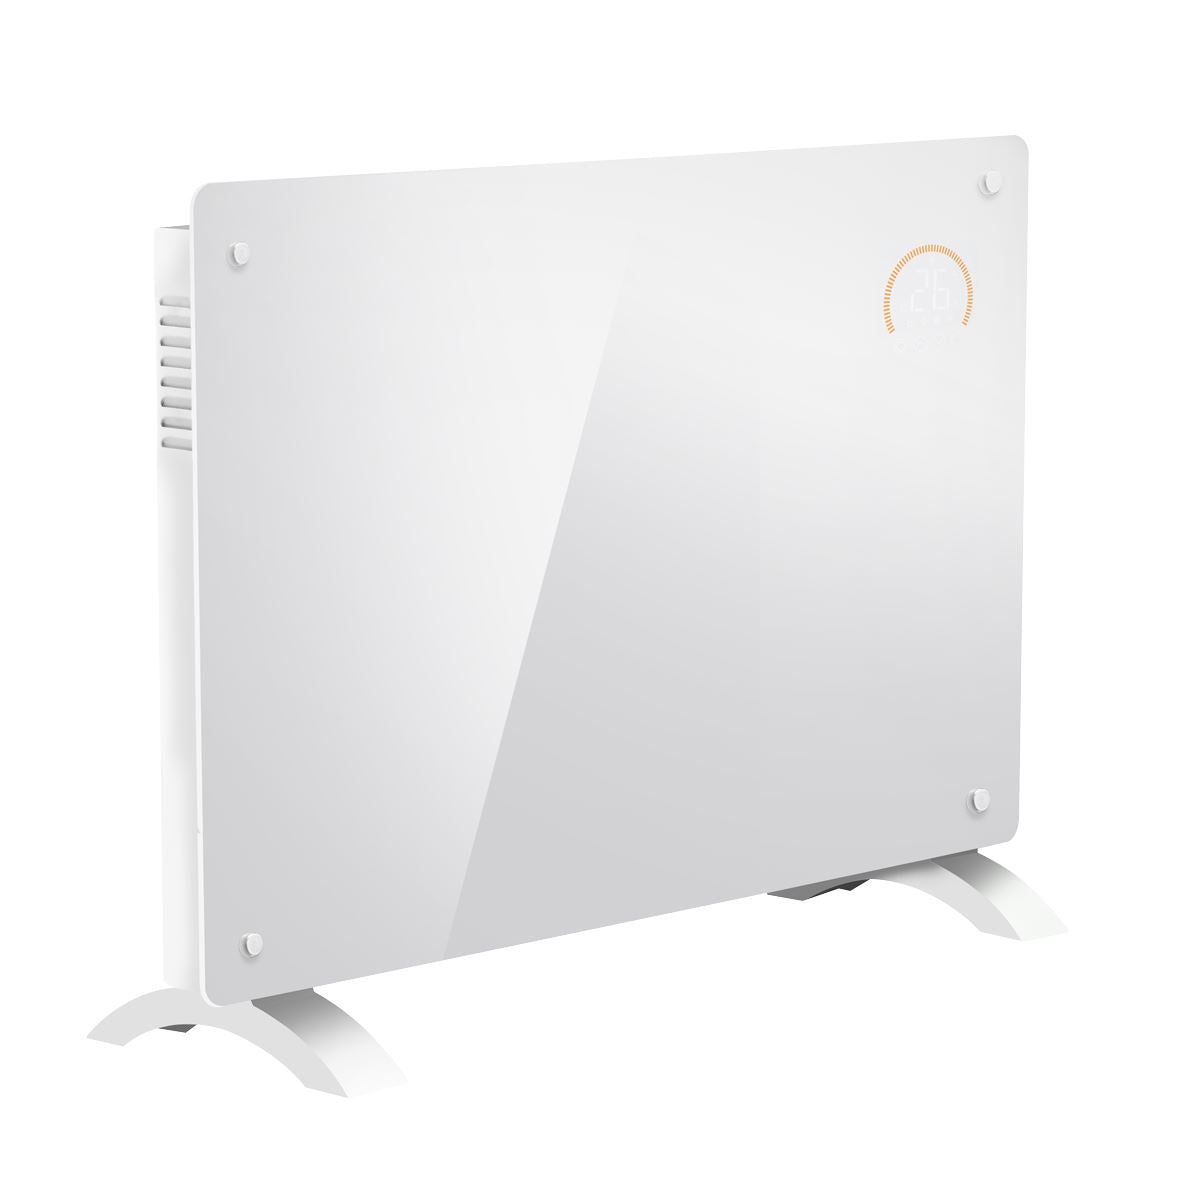 Baridi Electric Glass Panel Heater, 1500W, Thermostat Controlled 24Hr 7 Day Timer, Wi-Fi Enabled, Remote Control, White